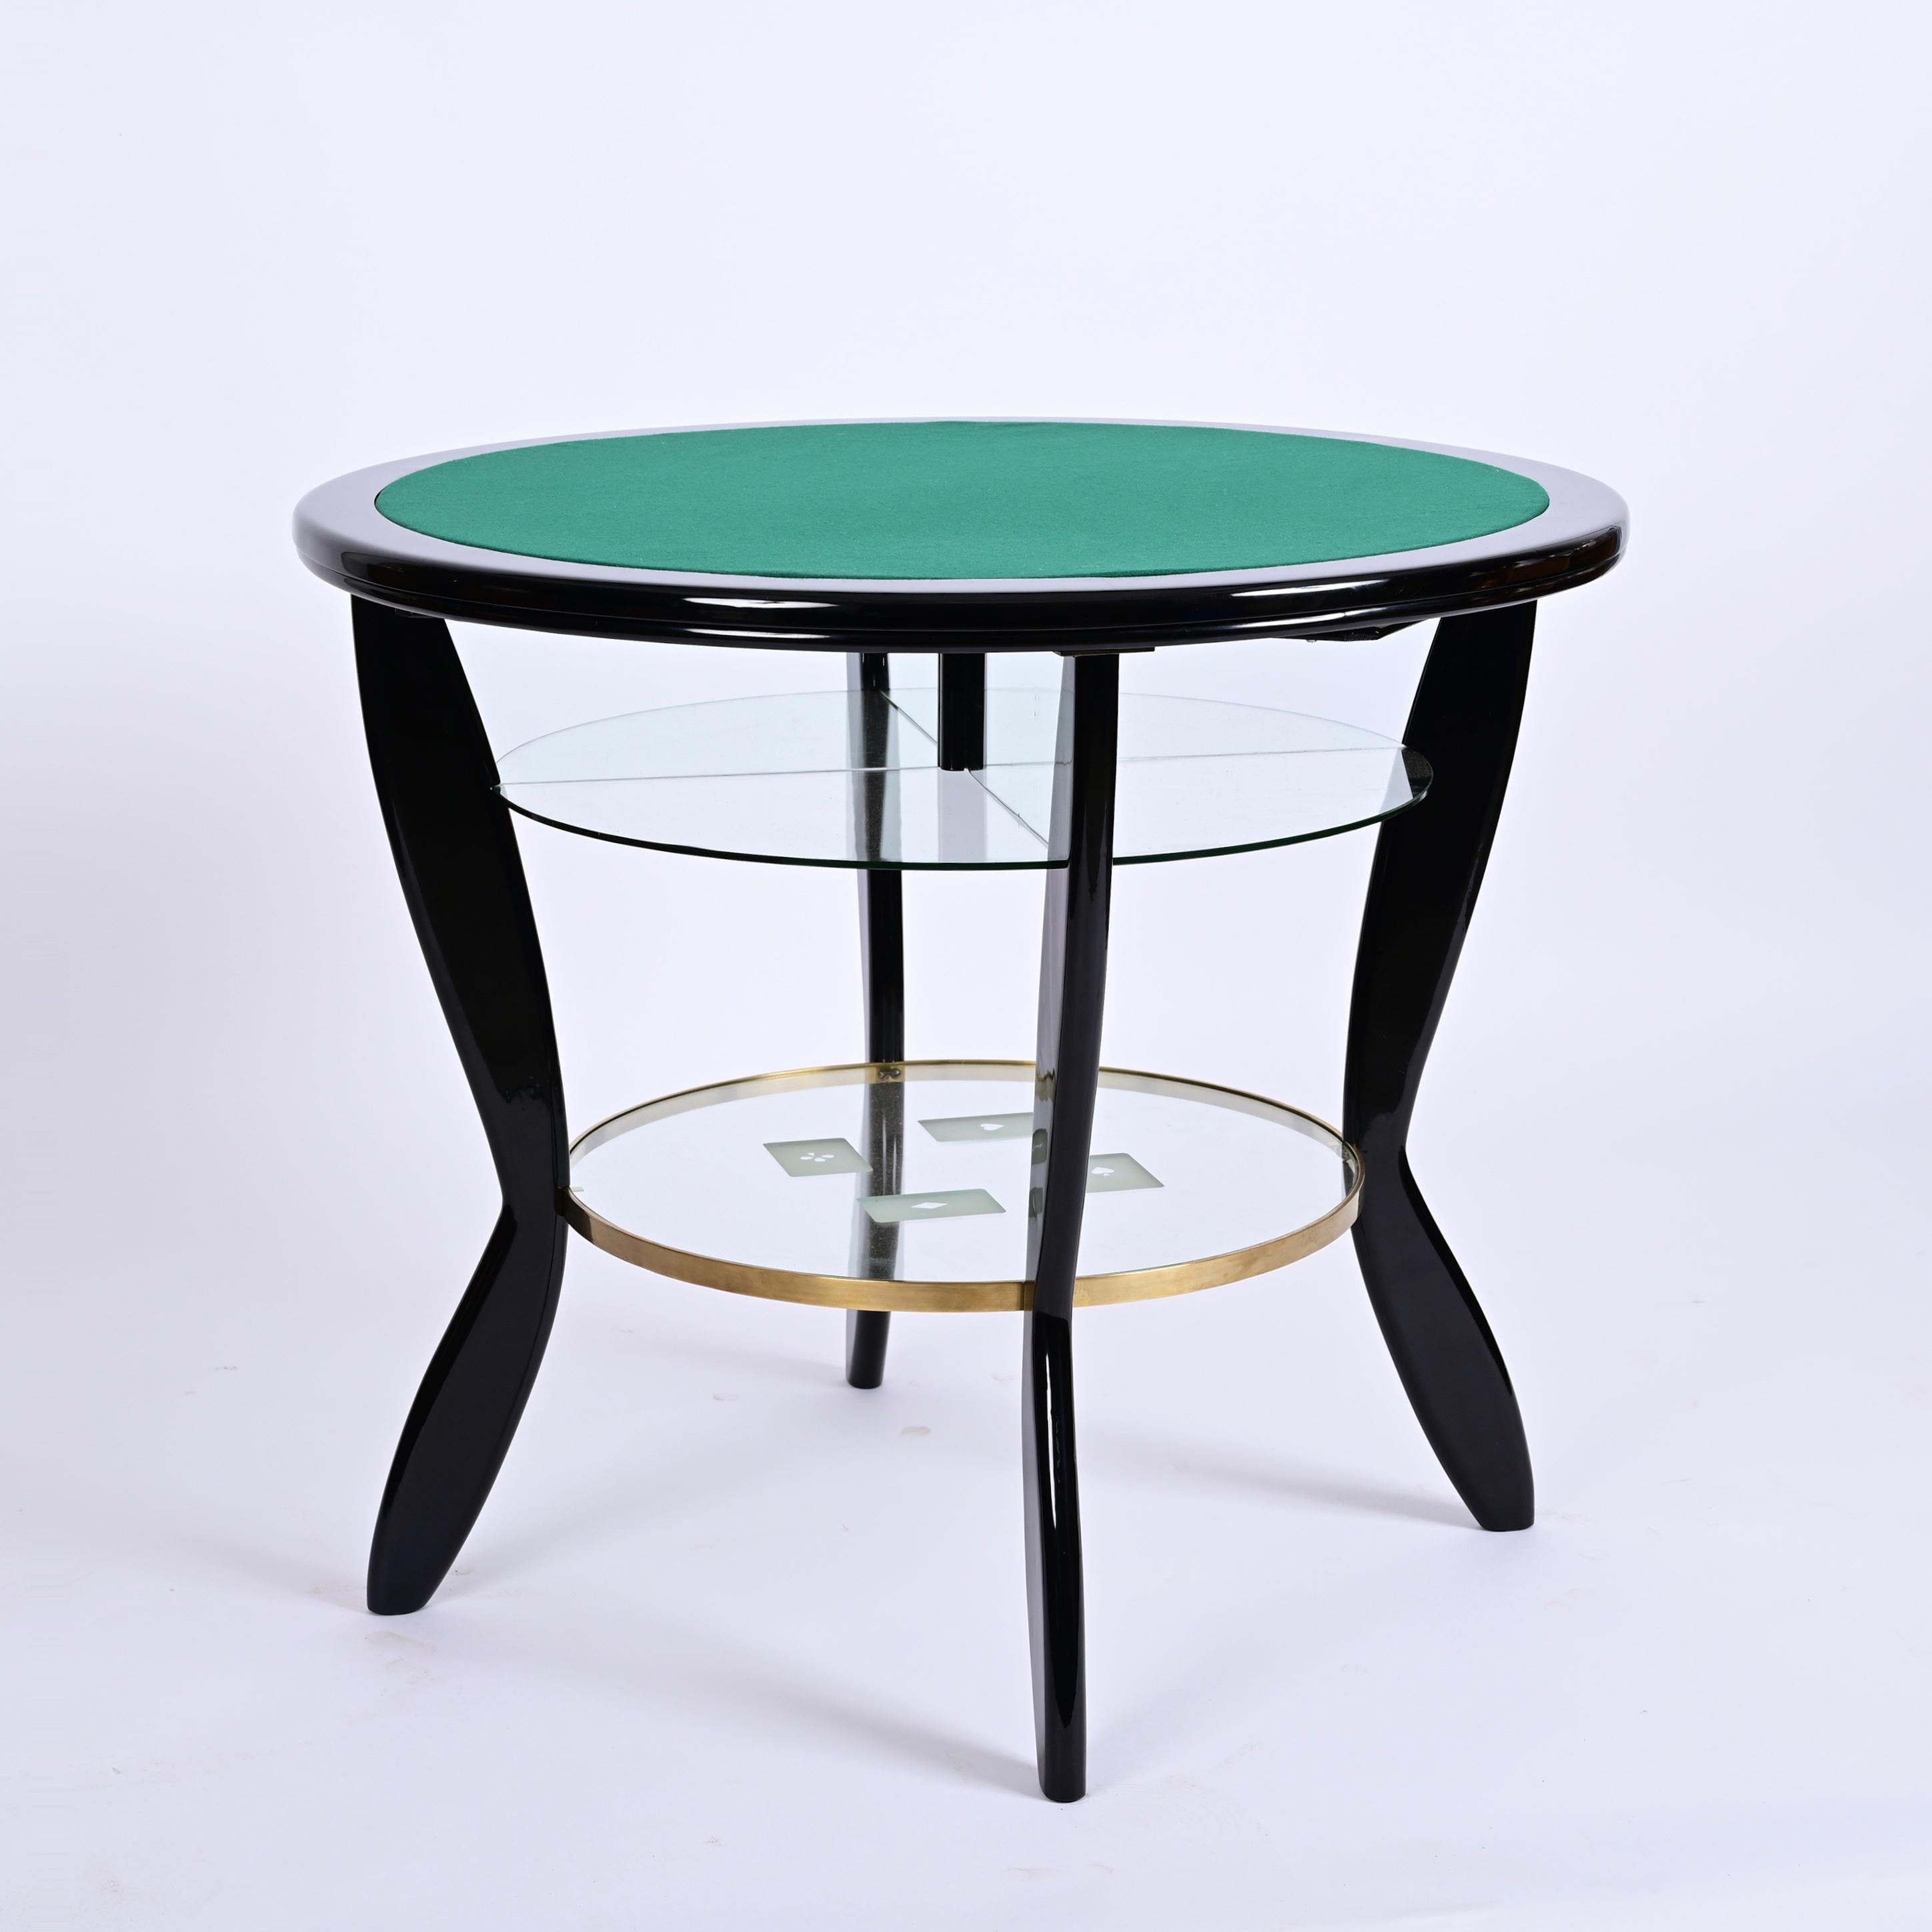 Gio Ponti Style Ebonized Beech and Brass Italian Game Table with Glass, 1950s For Sale 1